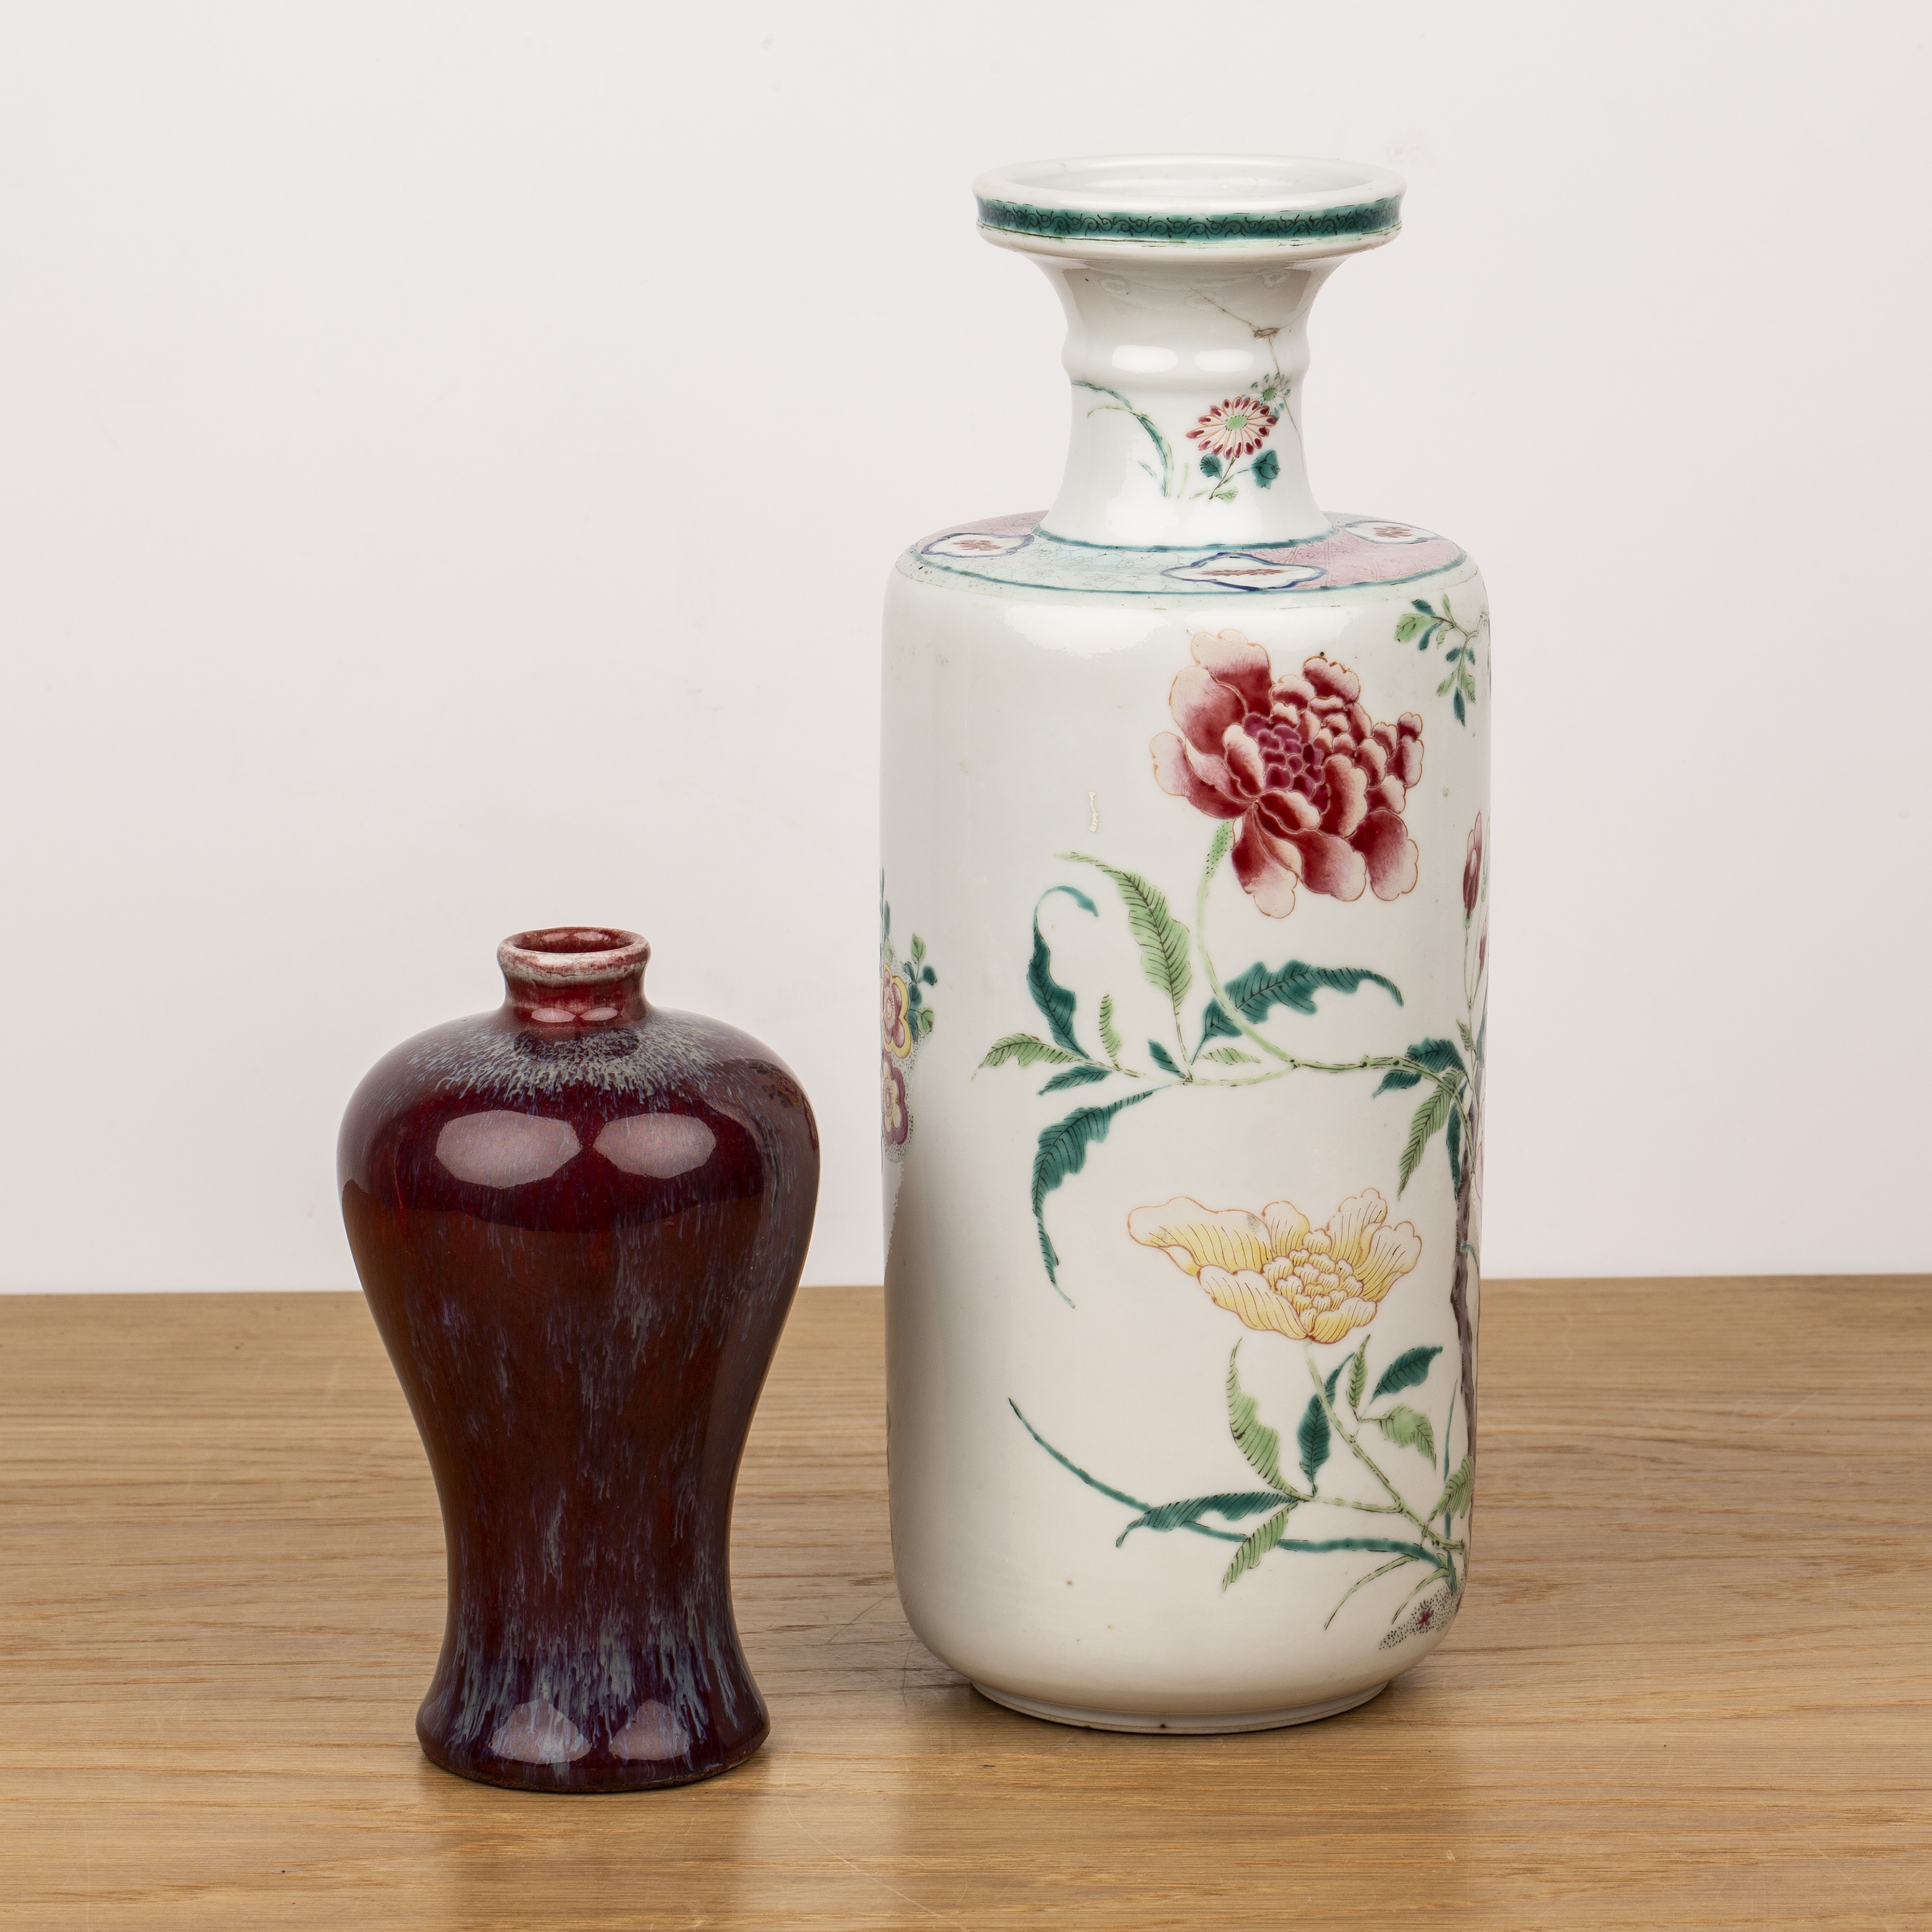 Famille rose vase and a flambe vase Chinese painted with birds, peonies and other flowers, 29cm high - Image 2 of 4